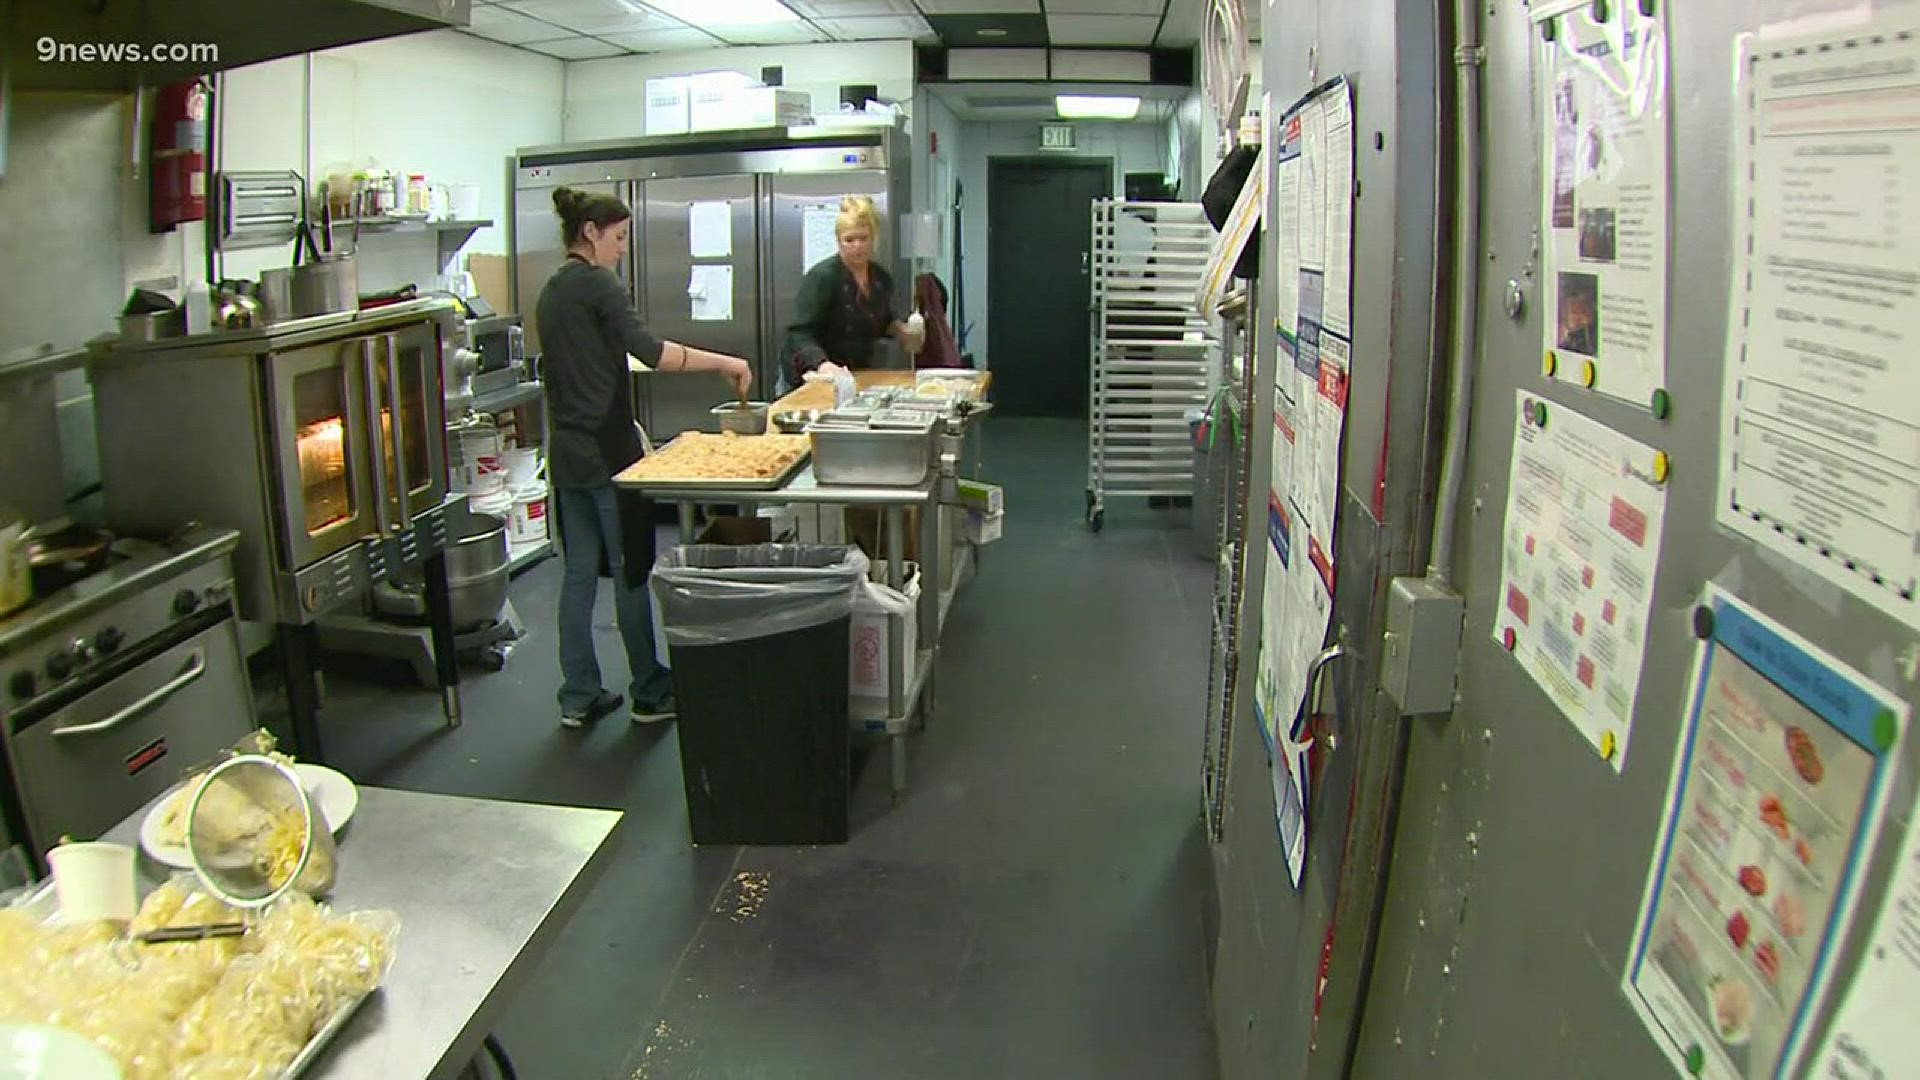 Giovanni's Italian Bakery and Cafe experienced a severe drop in business during the partial government shutdown.